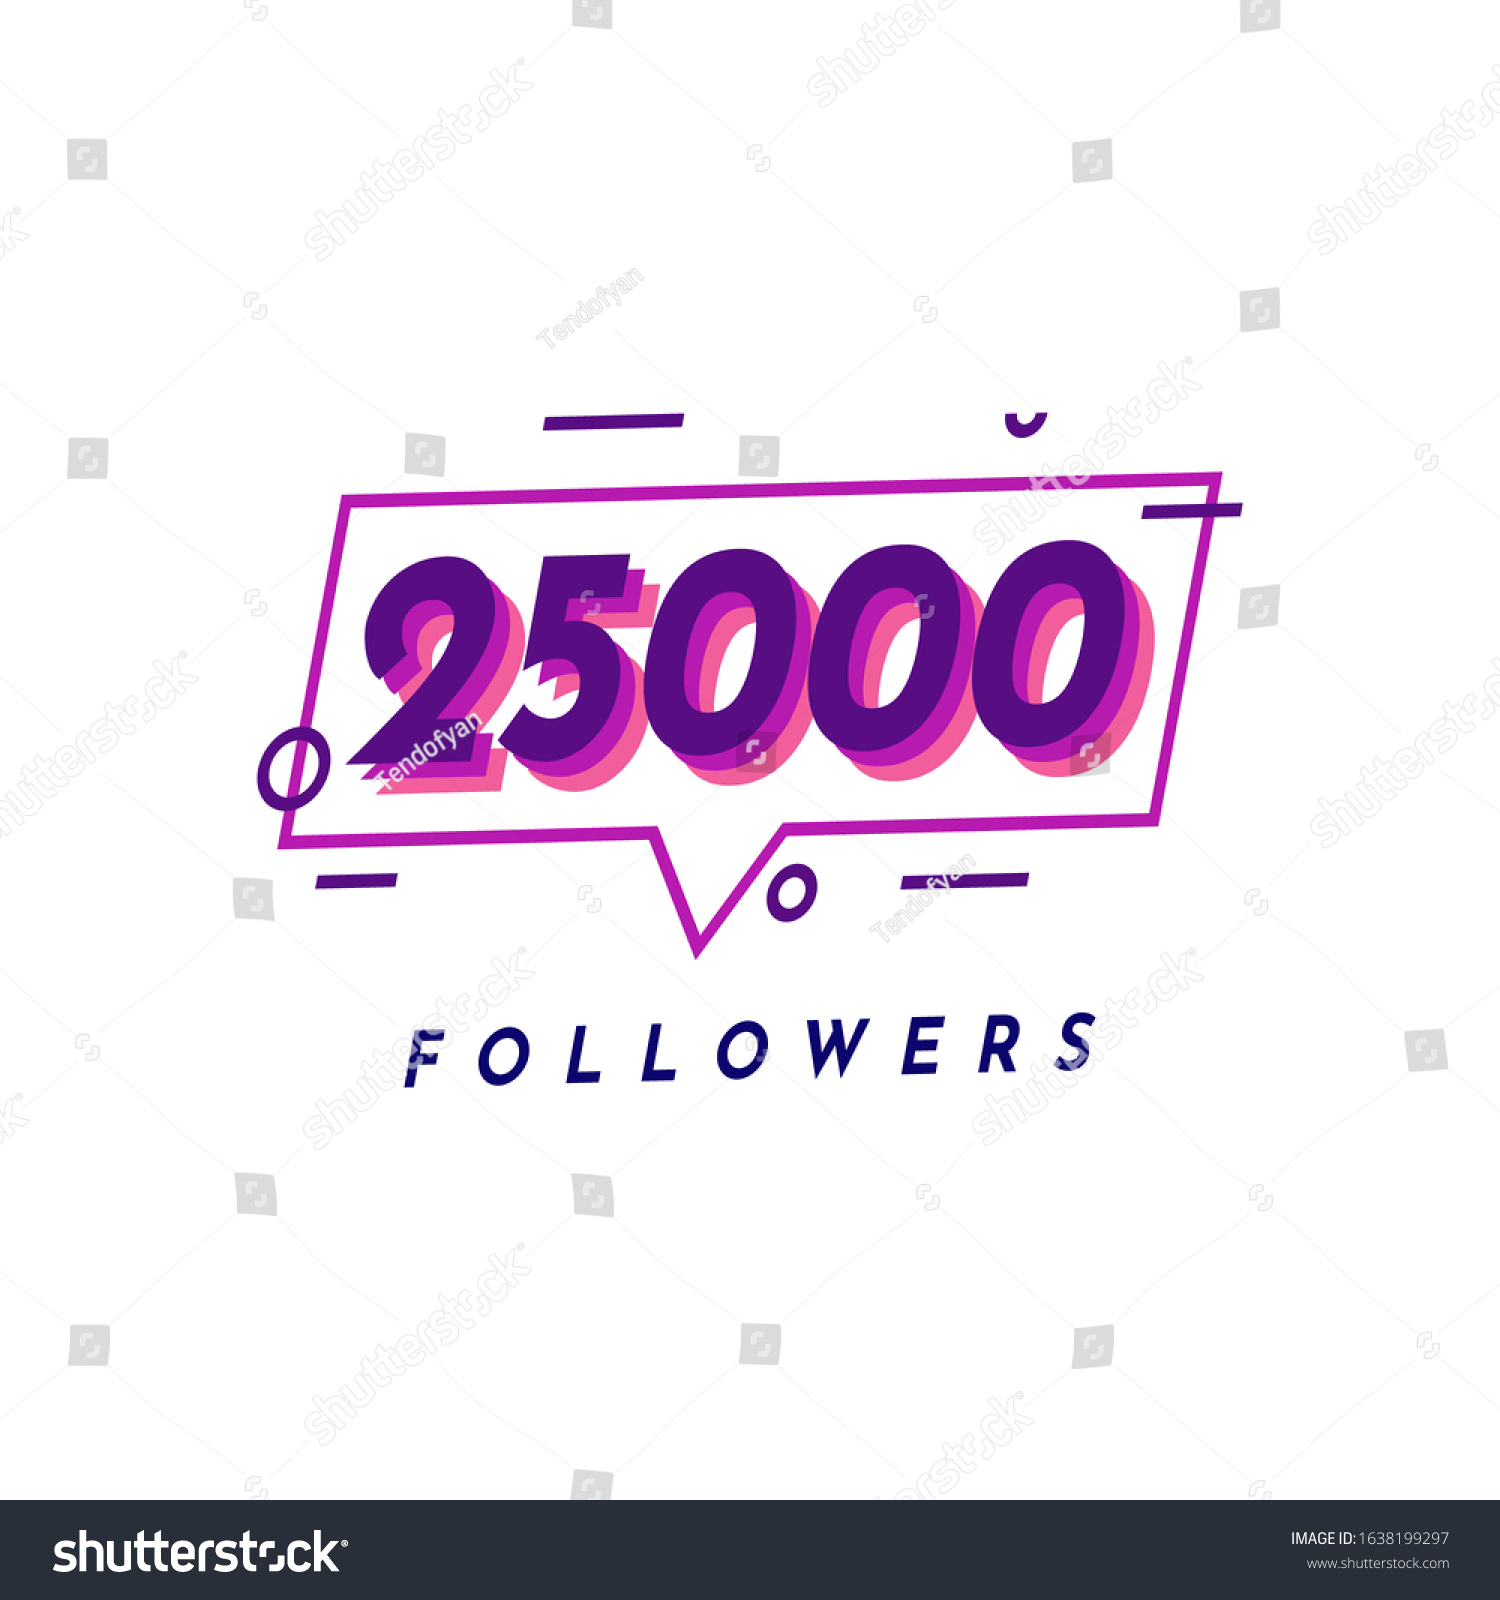 SVG of Thank You 25000 Followers template design. Vector Eps 10 svg